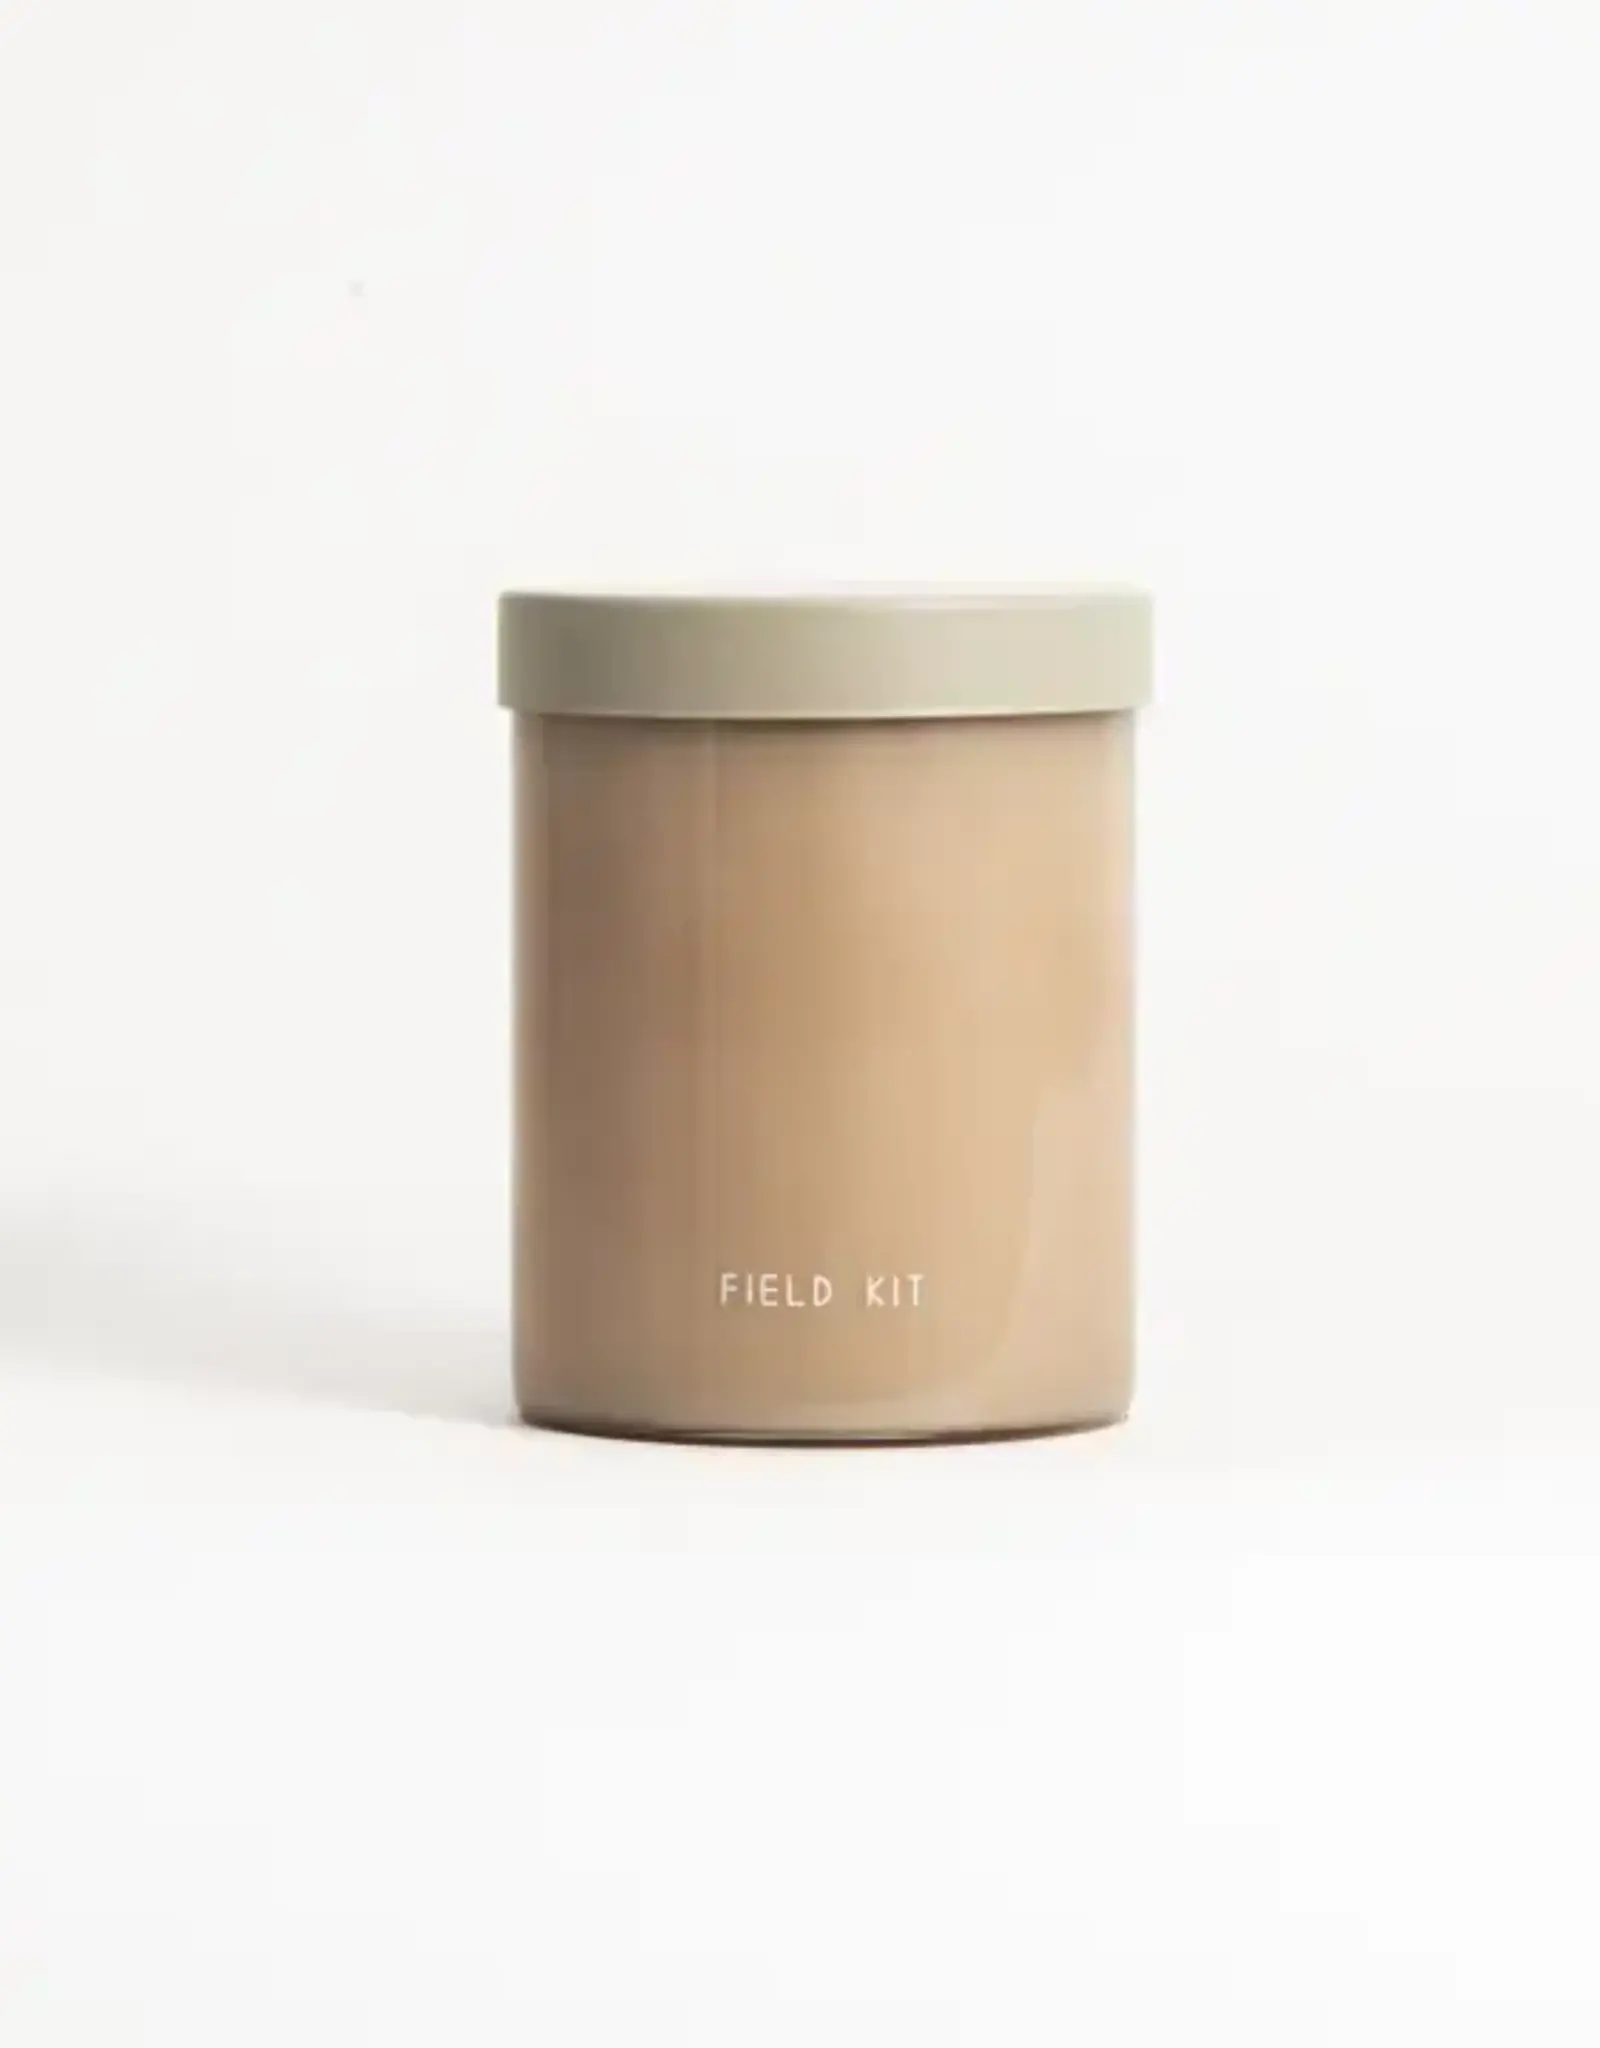 Field Kit - Soy Candle / The Sauna, 8oz